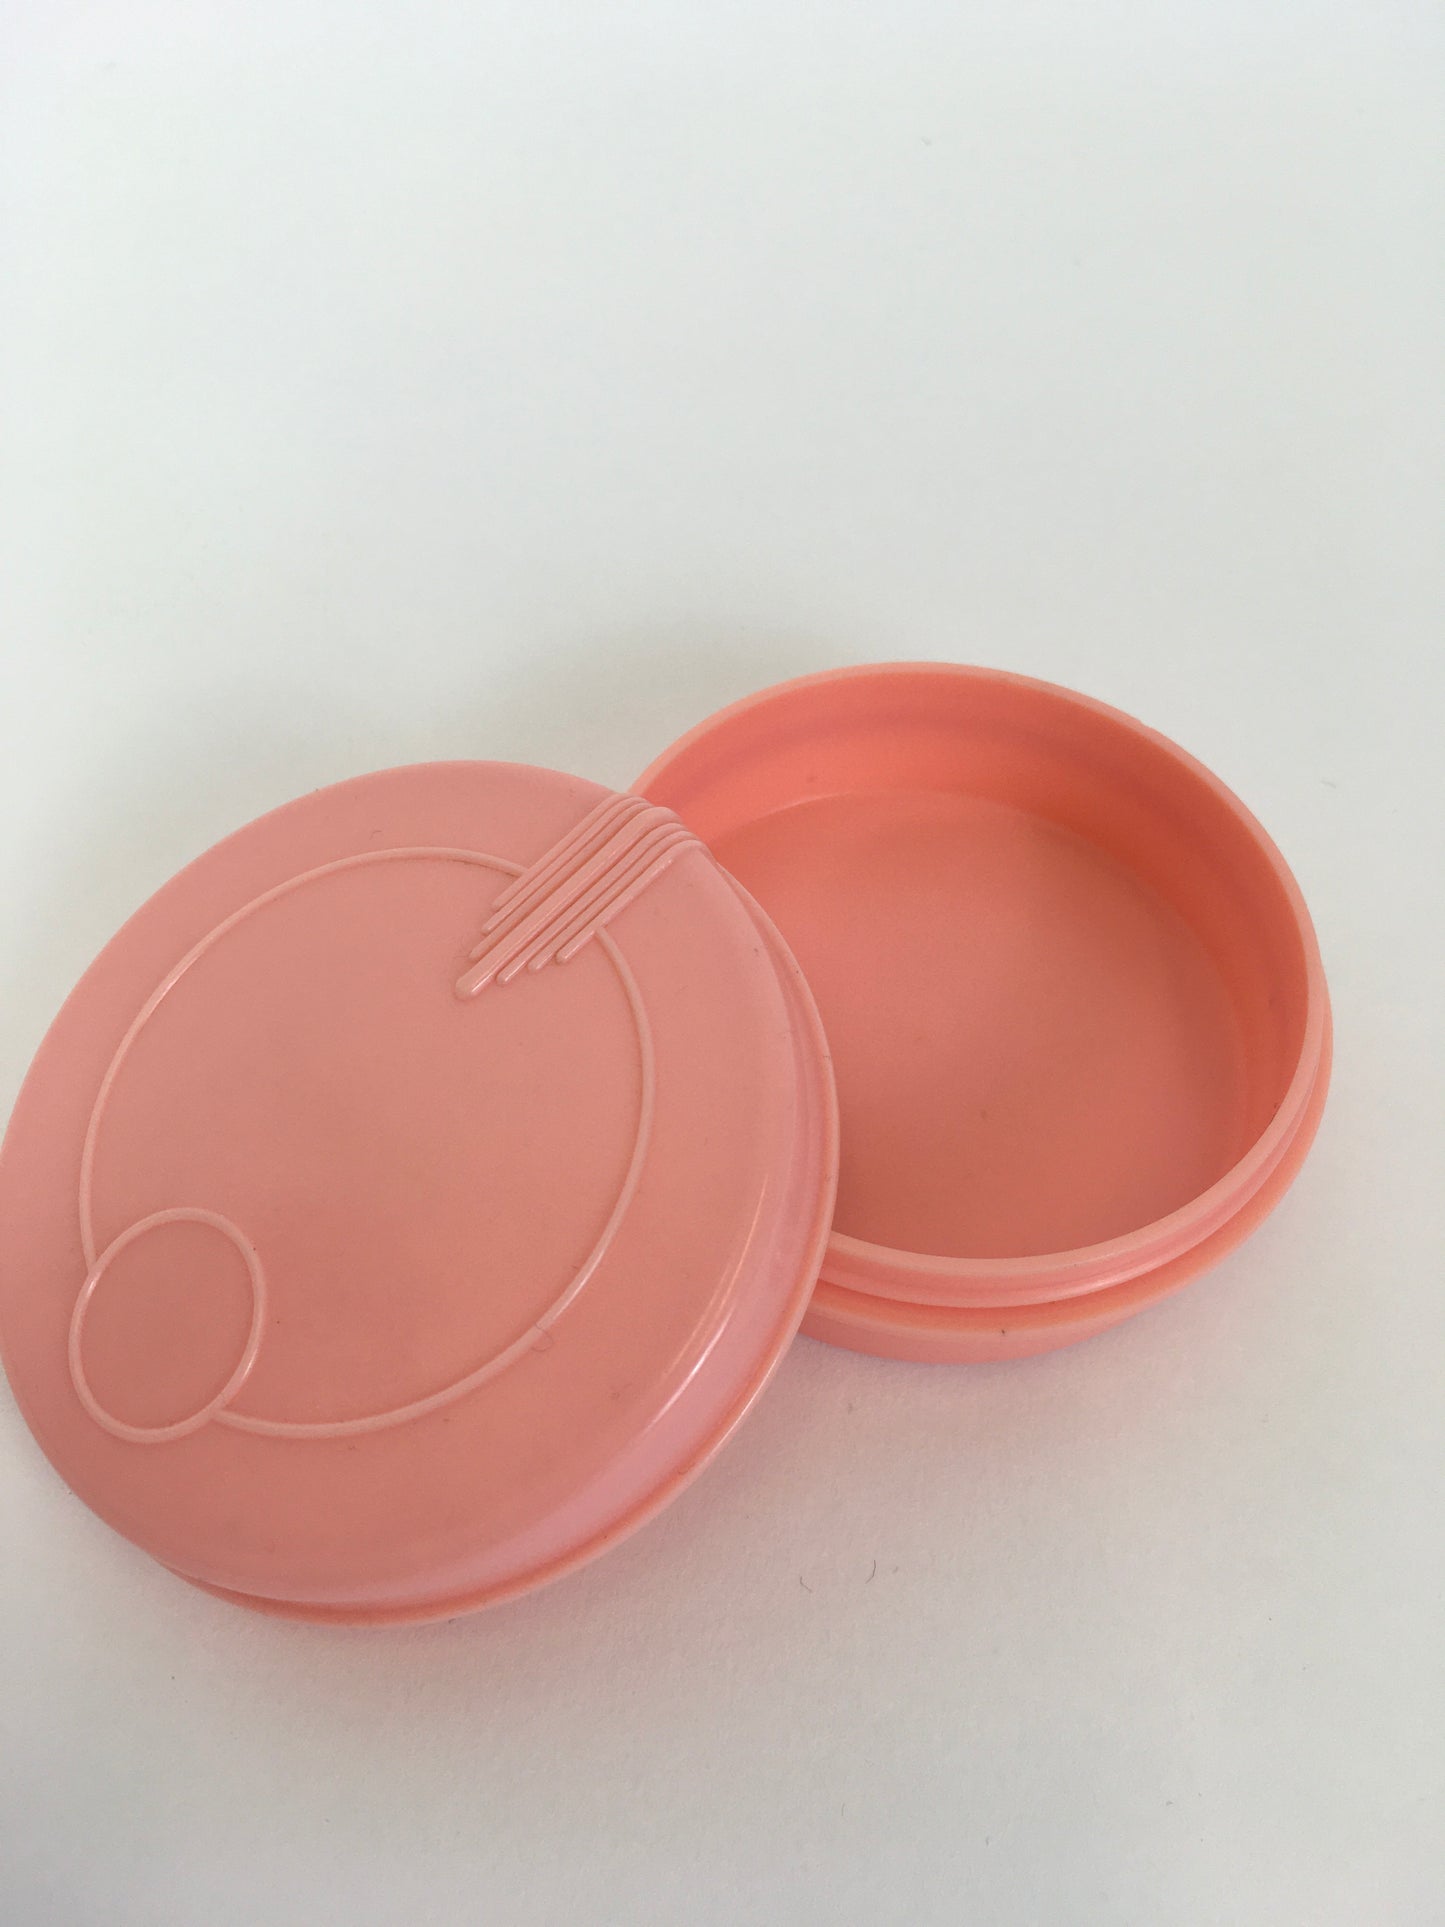 Original 1930’s / 1940’s Celluloid Vanity Pot - In A Soft Powdered Pink Perfect For A Vintage Vanity